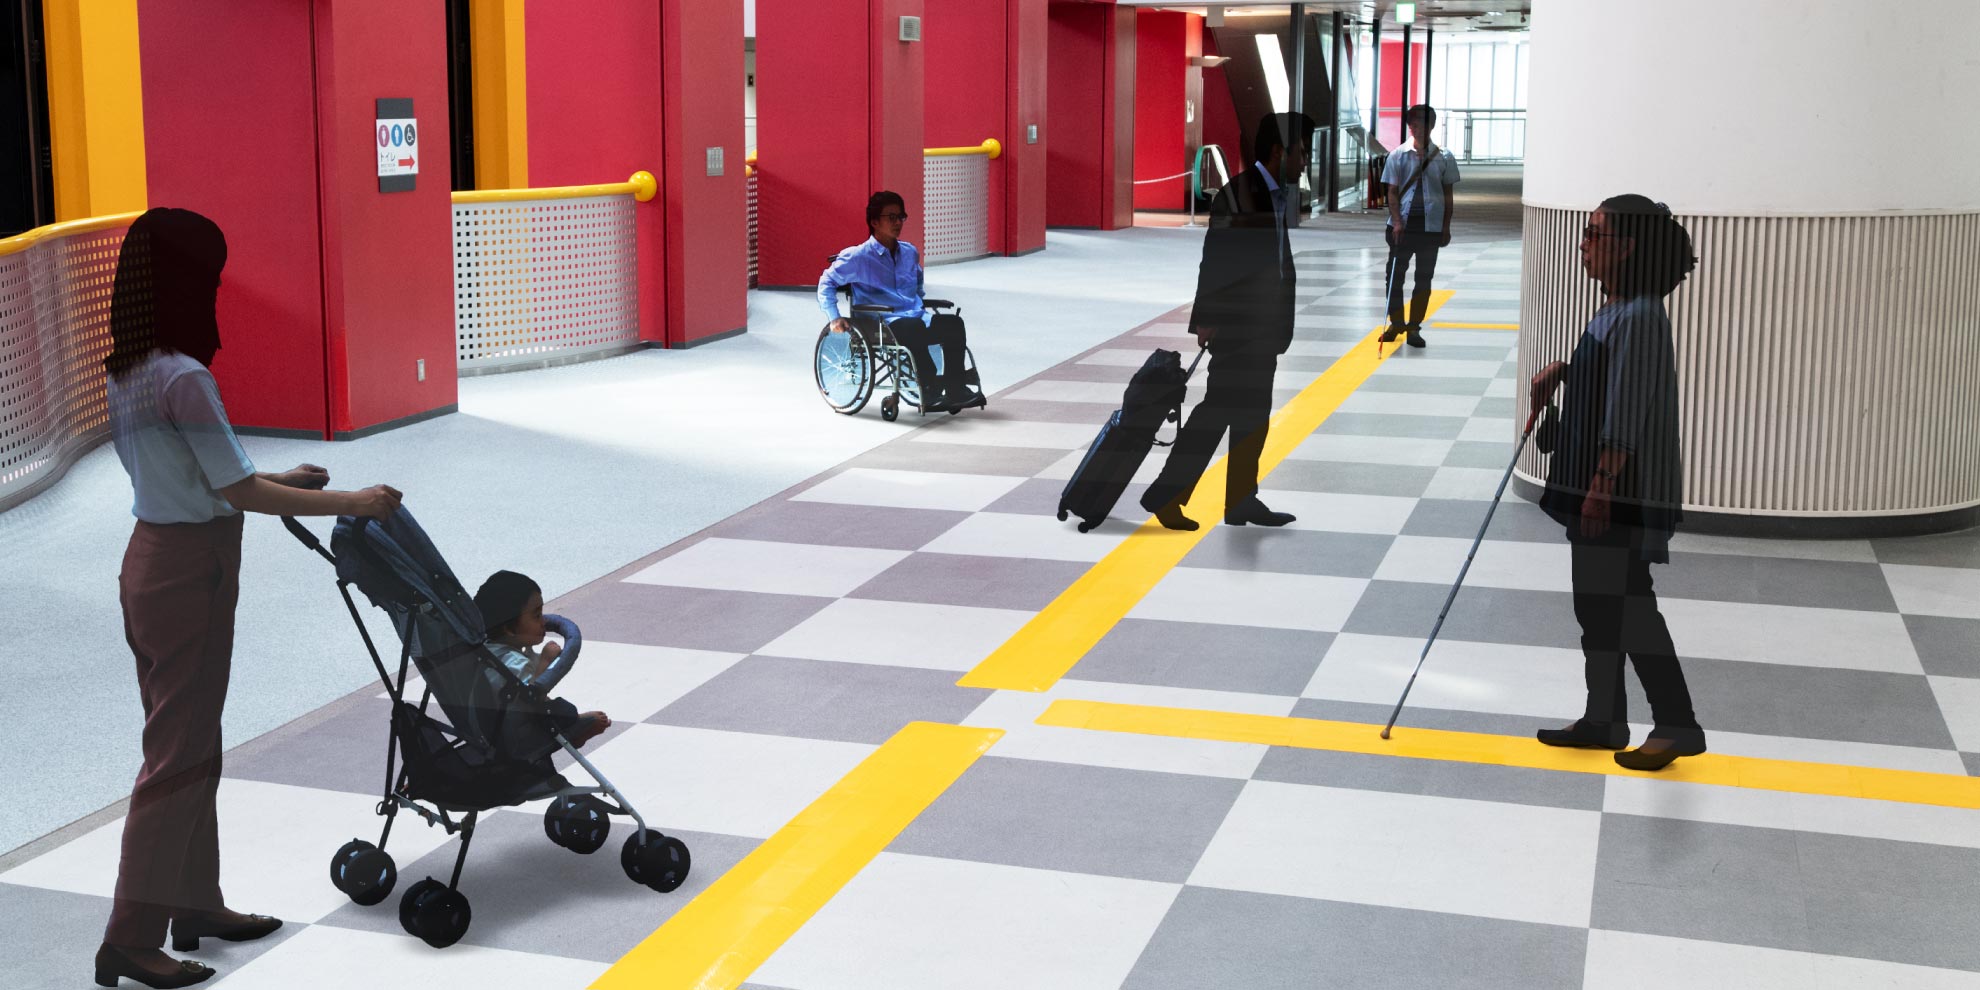 Image of a visually impaired person, a wheelchair user, a mother pushing a stroller, and a businessman with a suitcase sharing the same space.